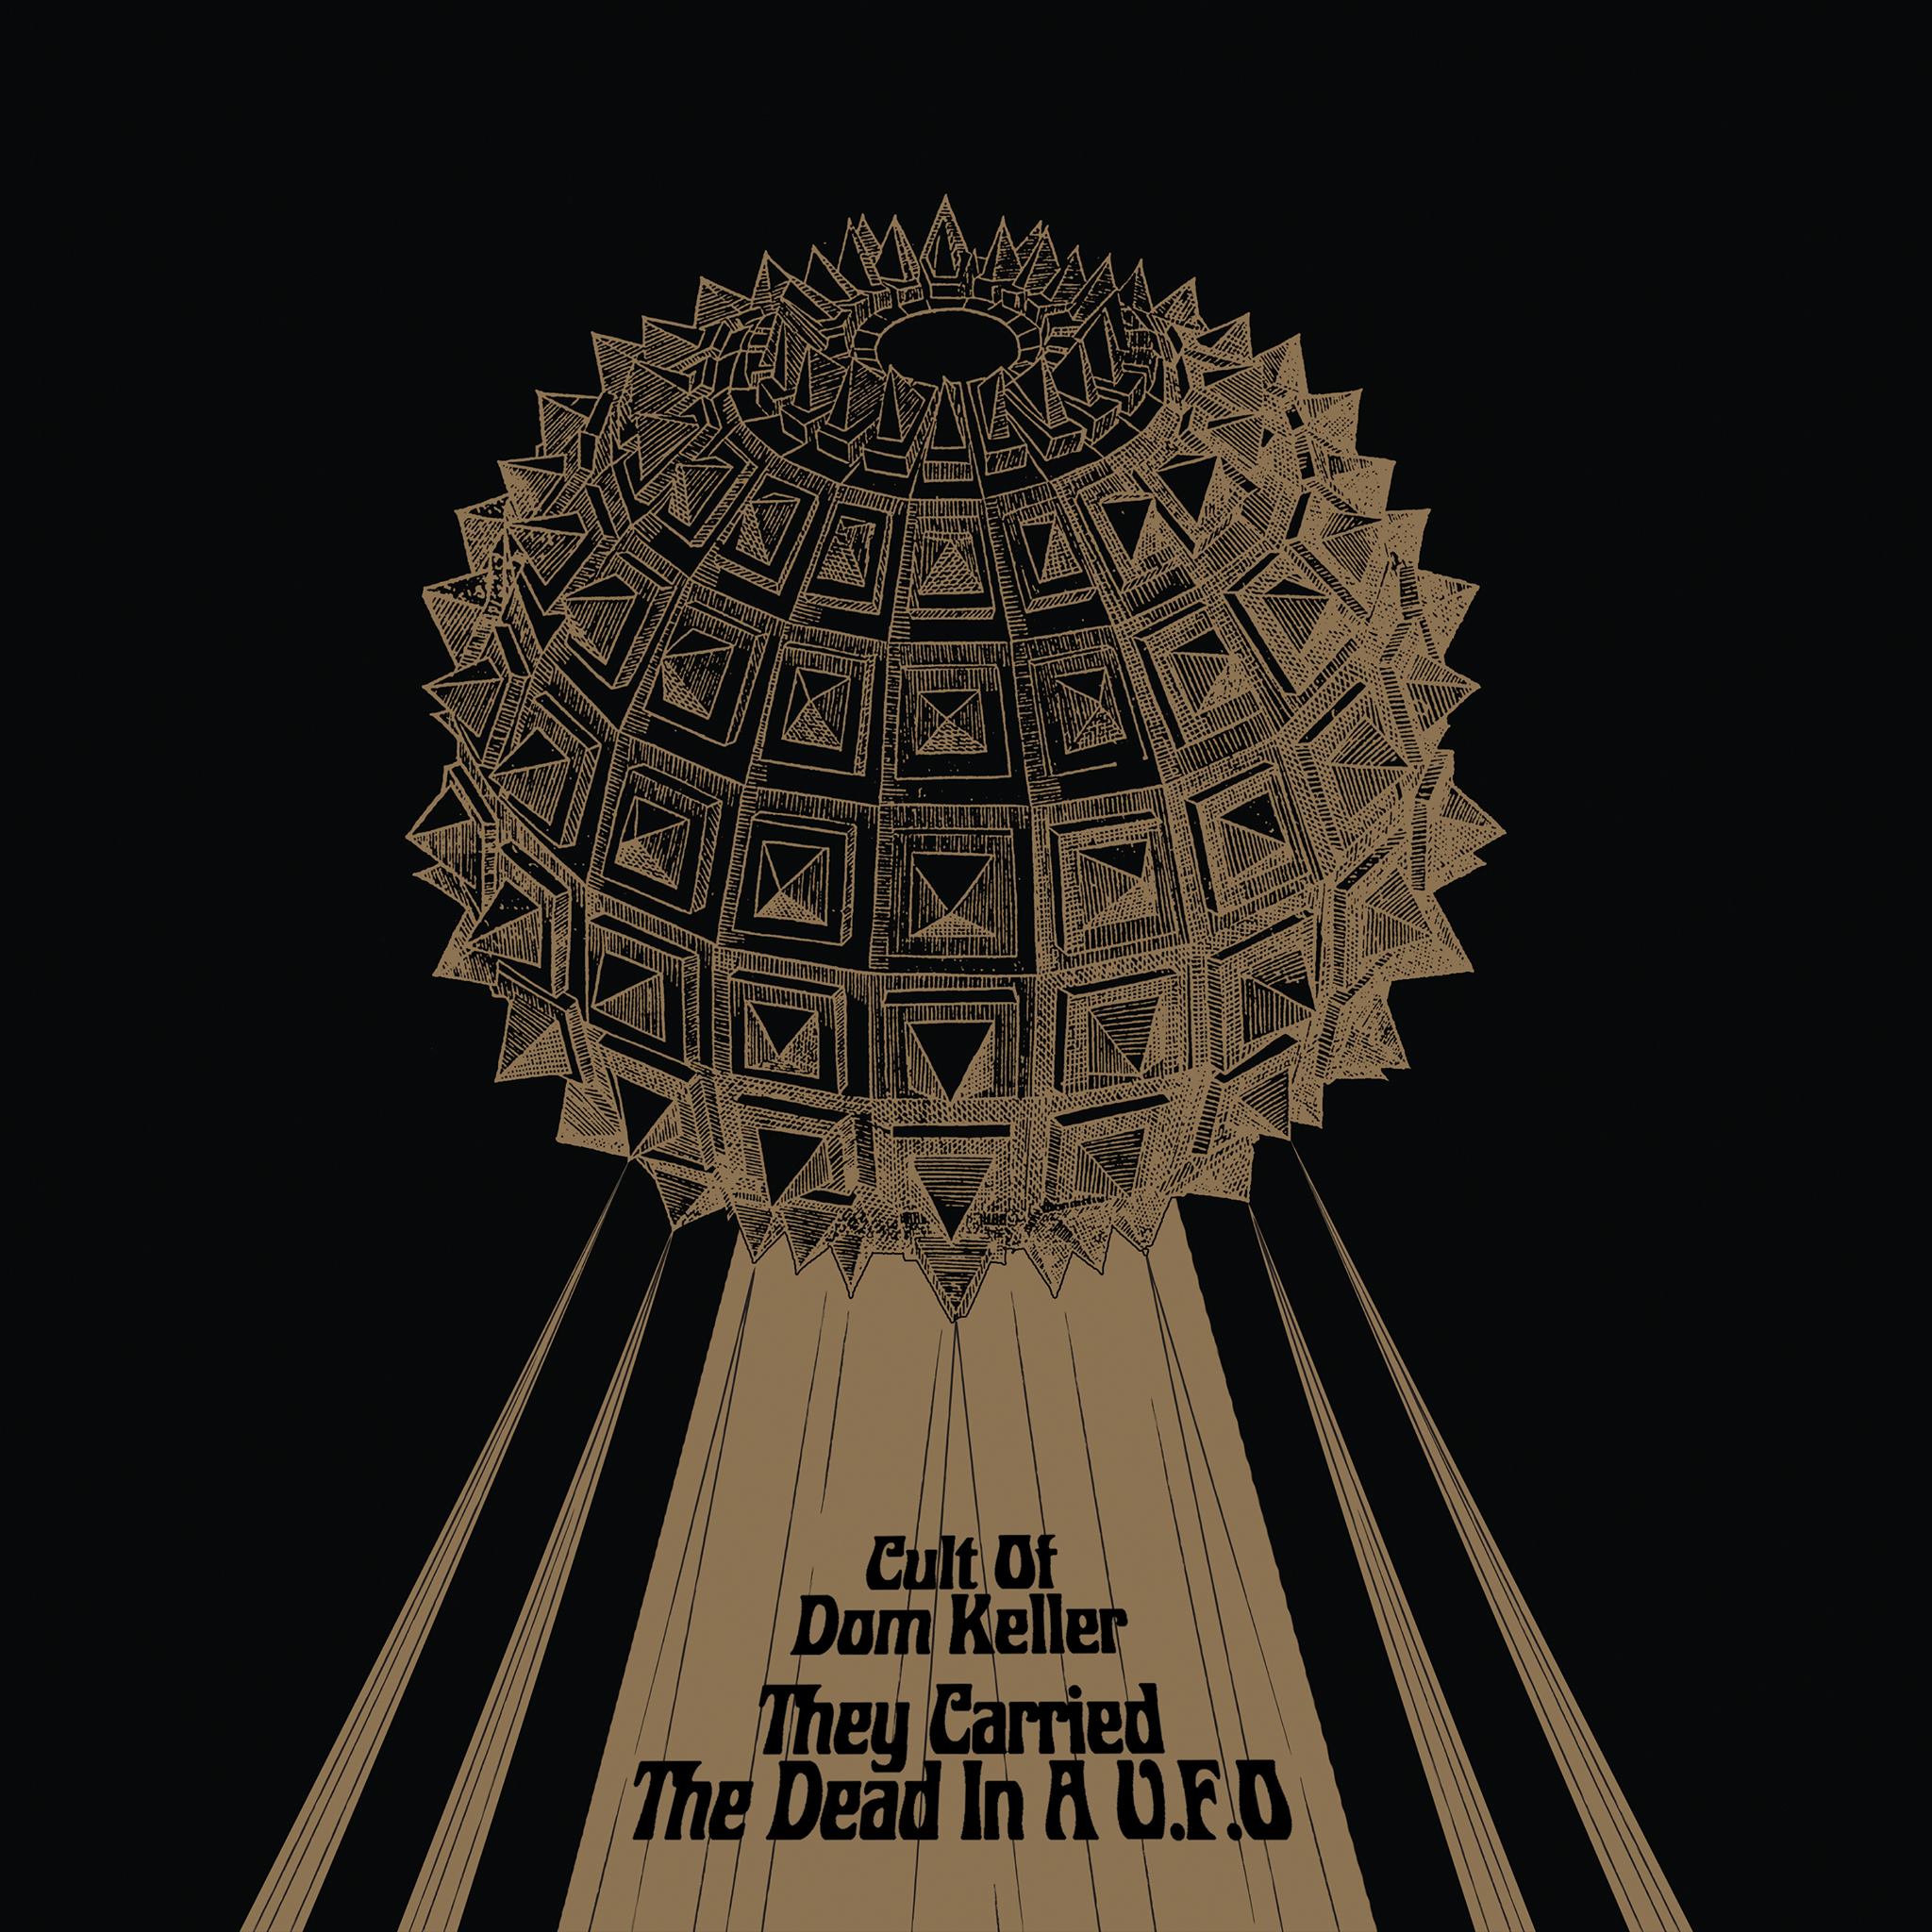 THE CULT OF DOM KELLER - They Carried The Dead In A U.F.O - LP - 180g Vinyl